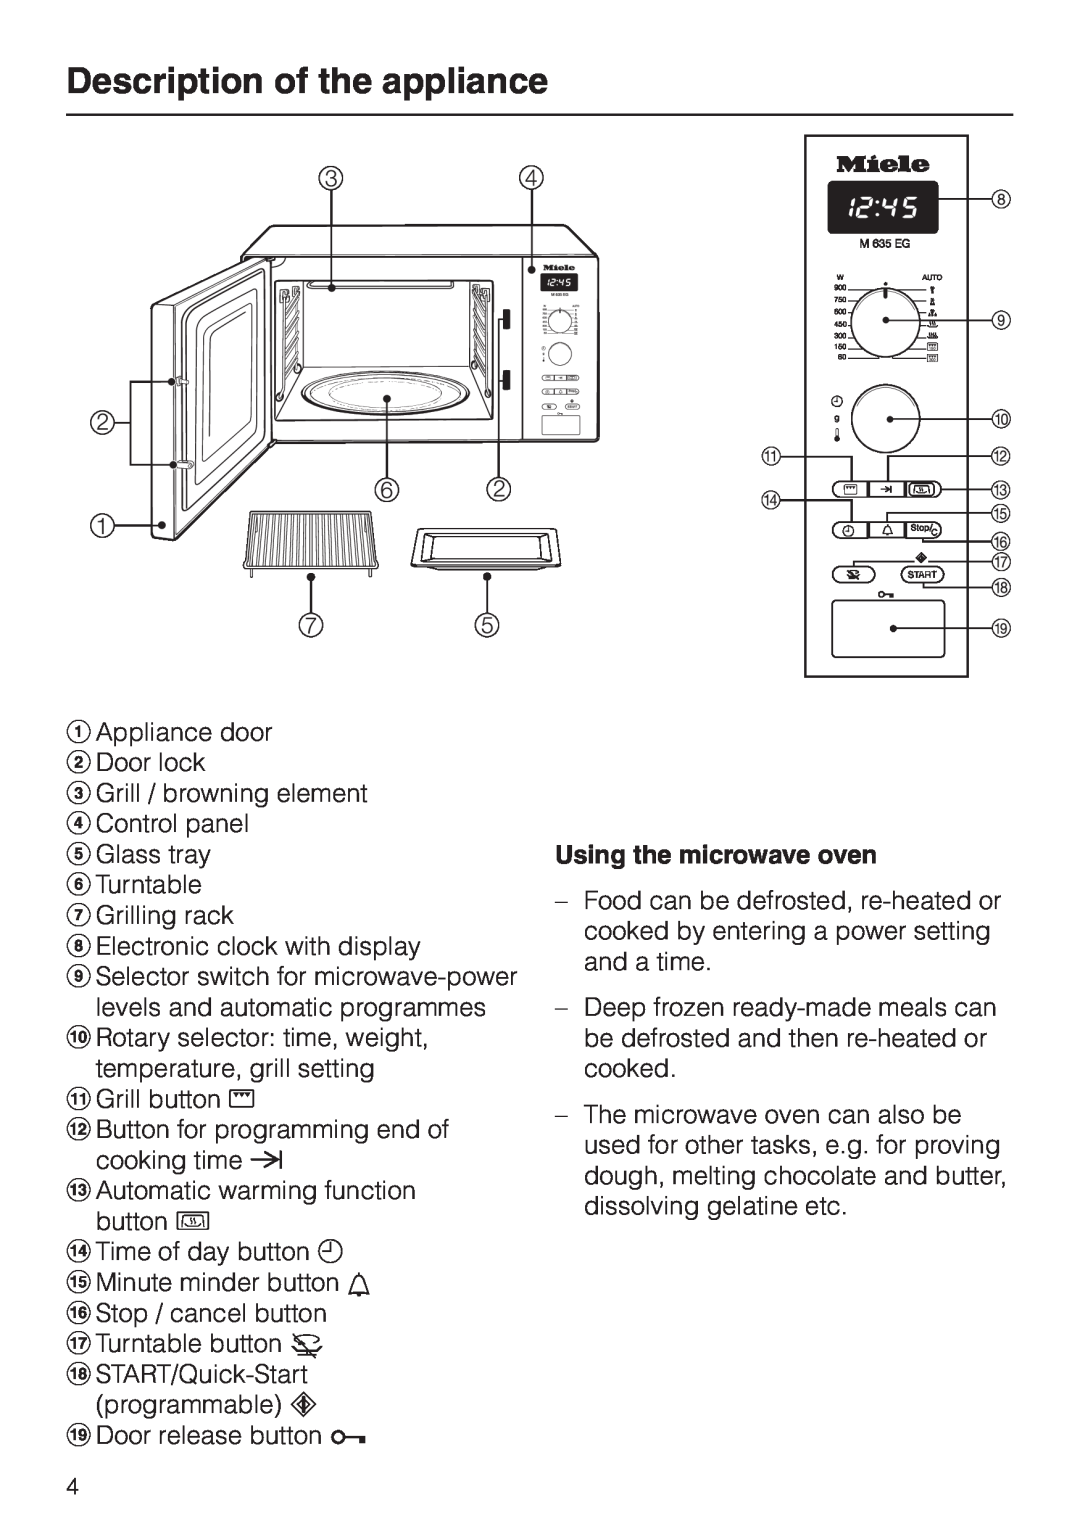 Miele M 635 EG manual Description of the appliance, Using the microwave oven 